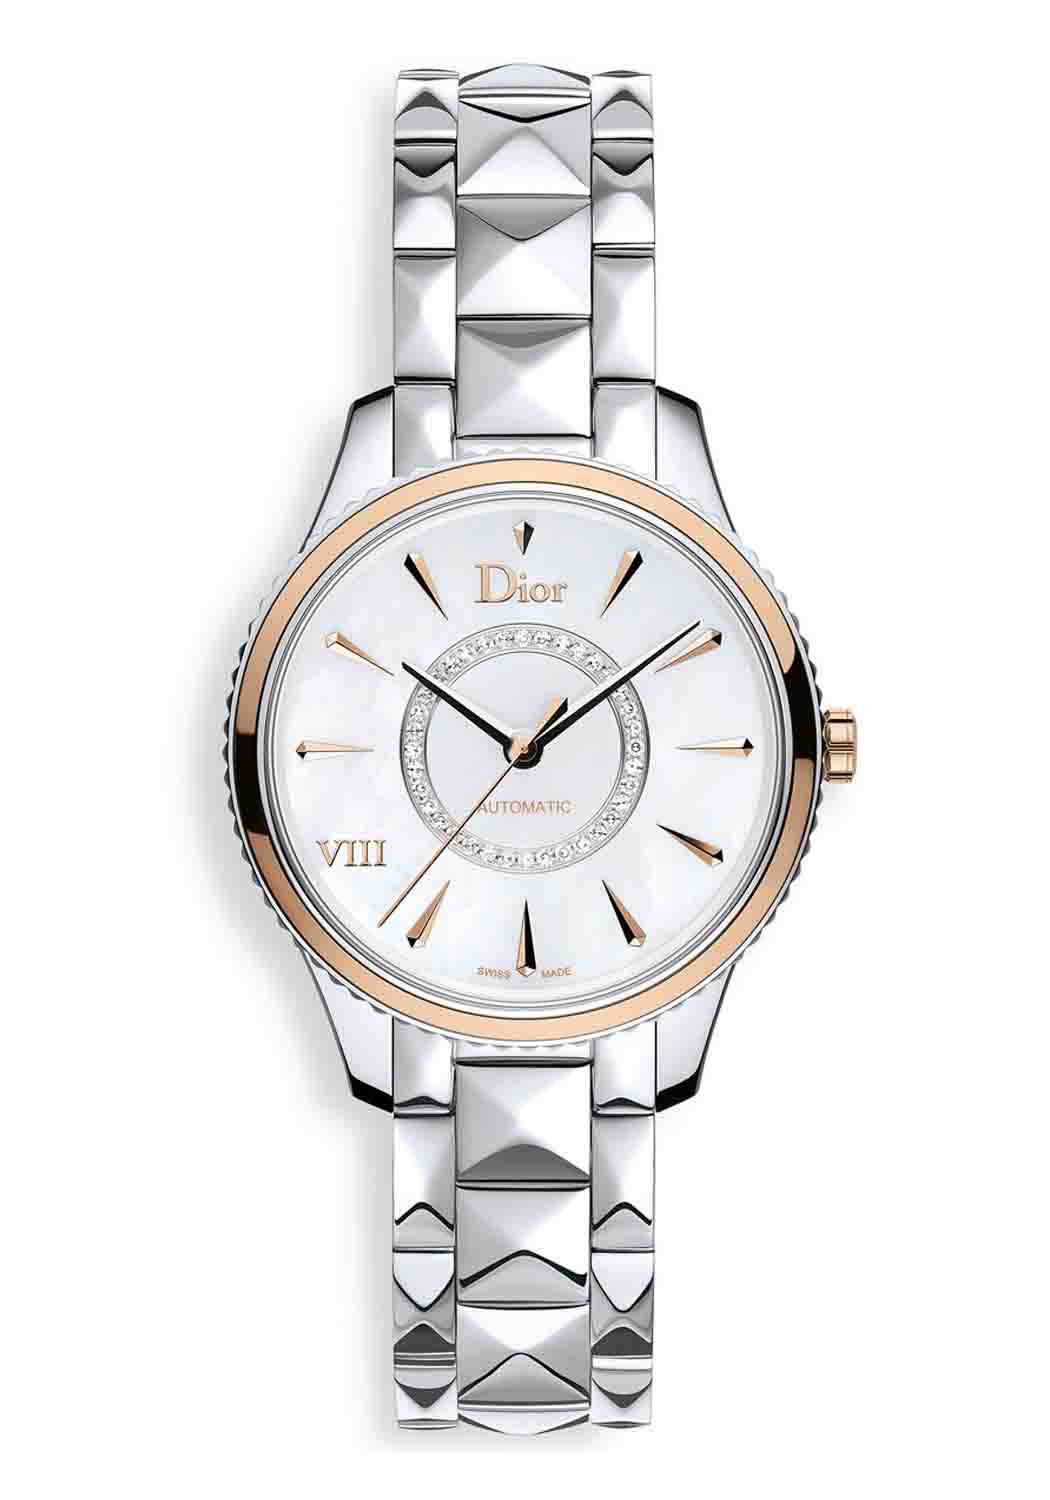 Dior VIII Montaigne White Mother of Pearl 36mm CD1535I0M001